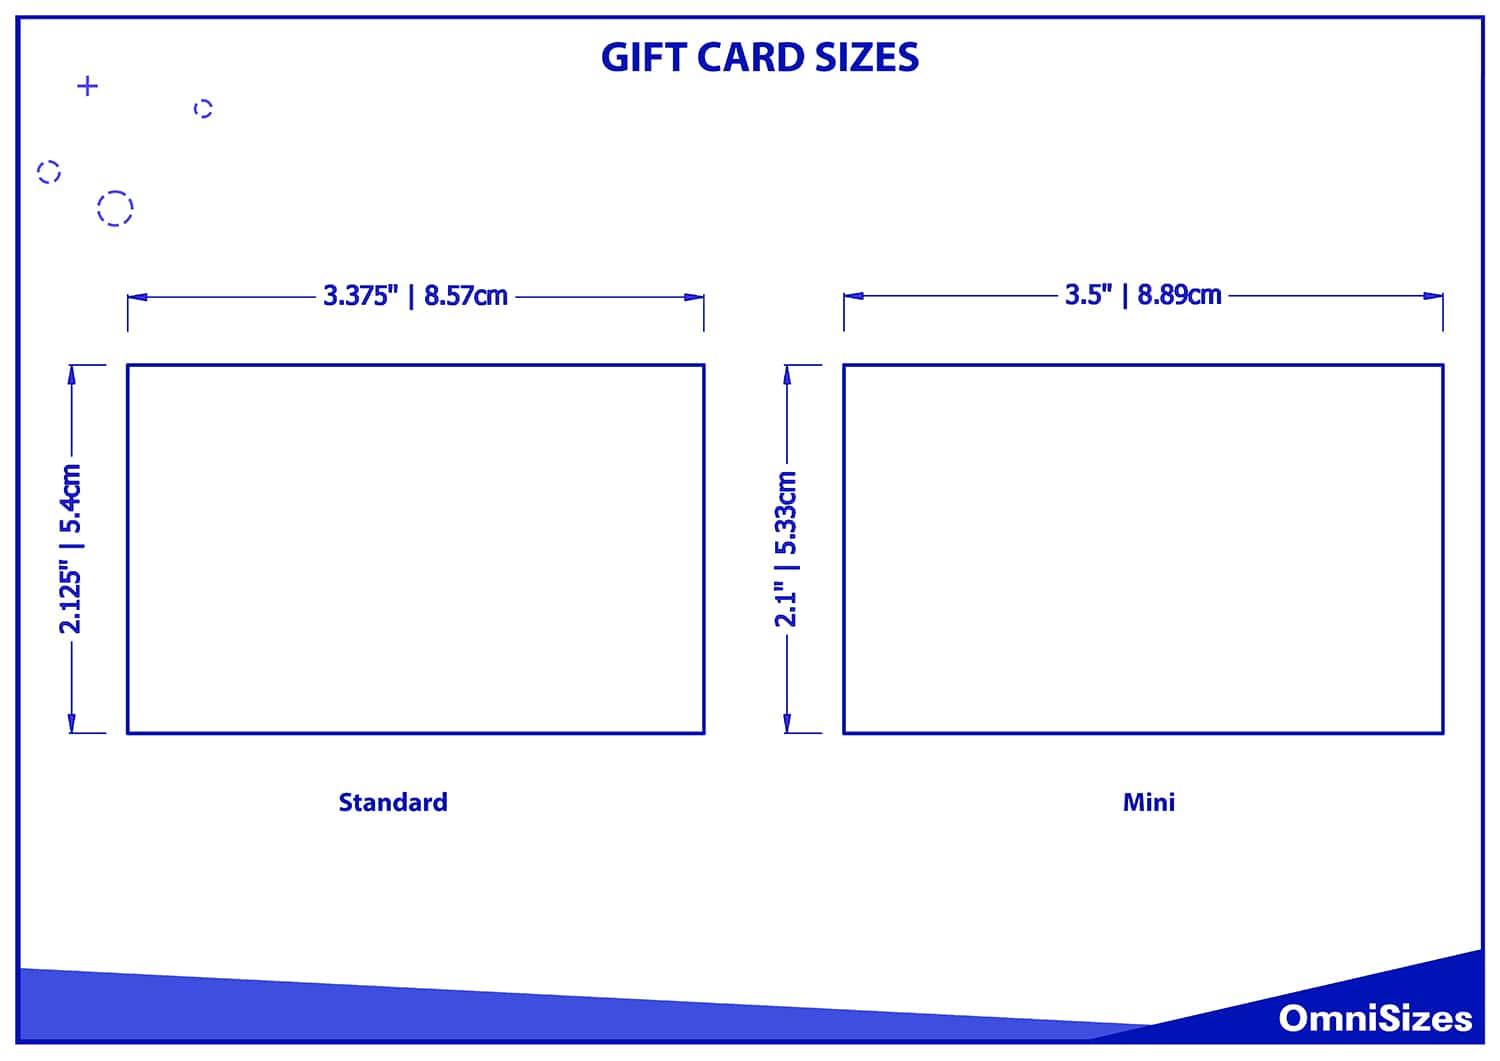 Gift card sizes